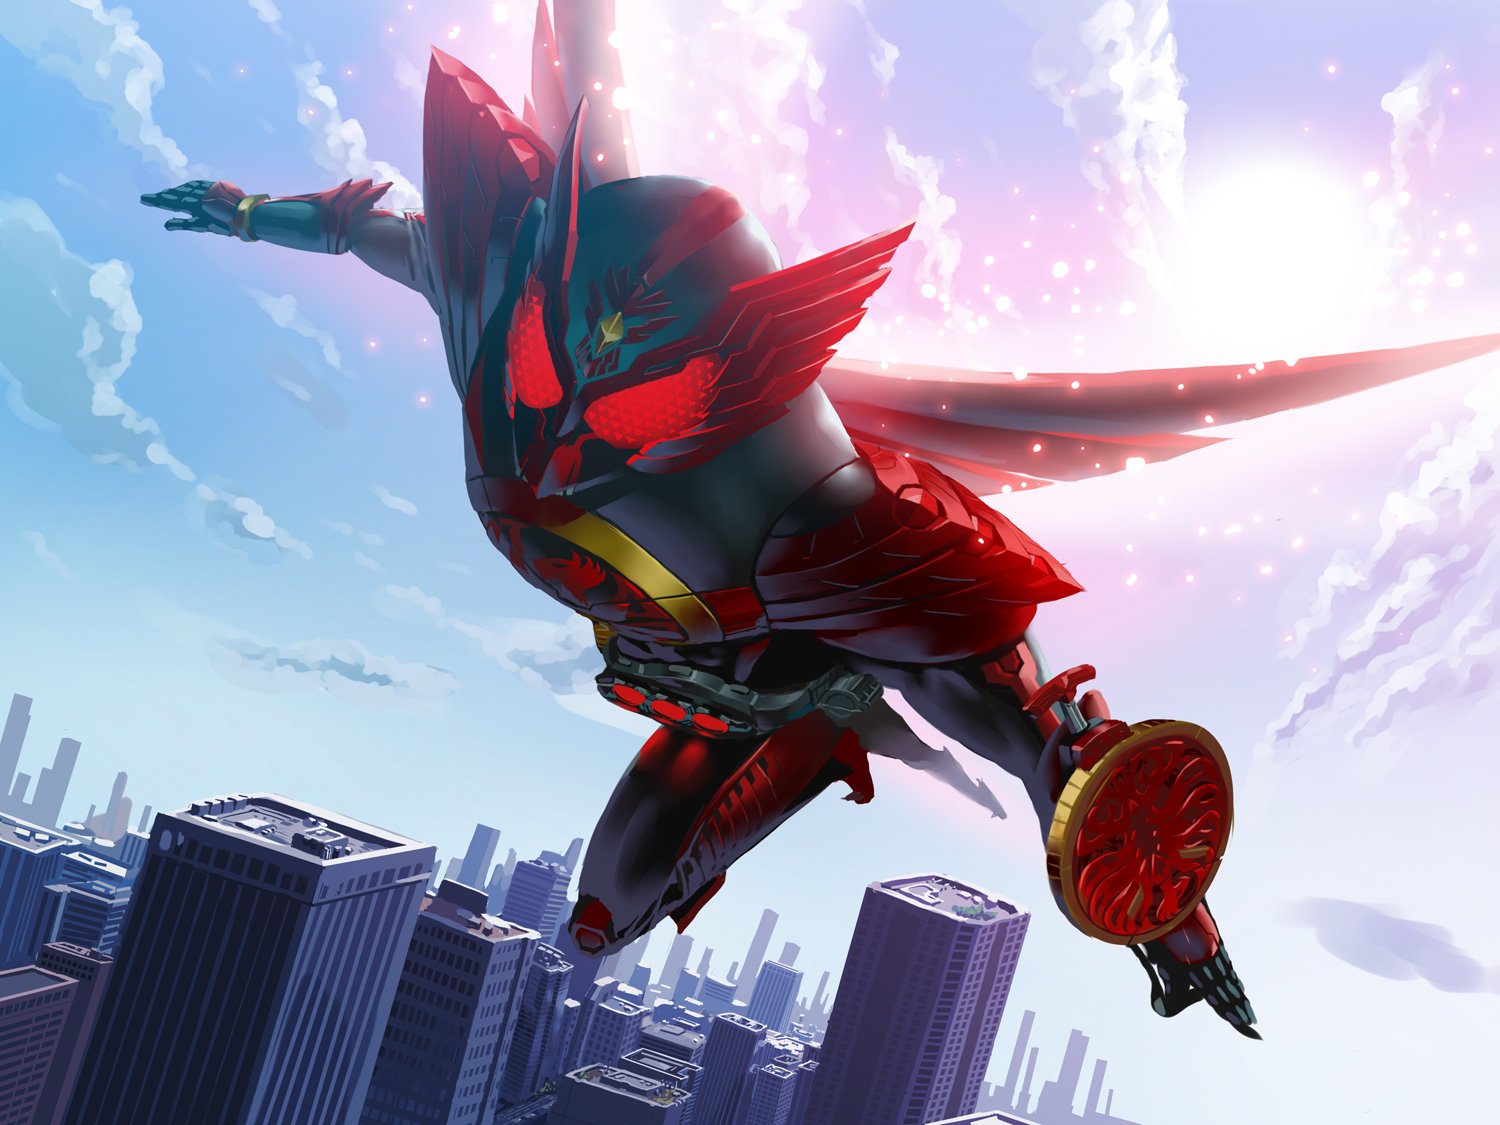 Kamen Rider Ooo Wallpaper And Background Image 1500x1125